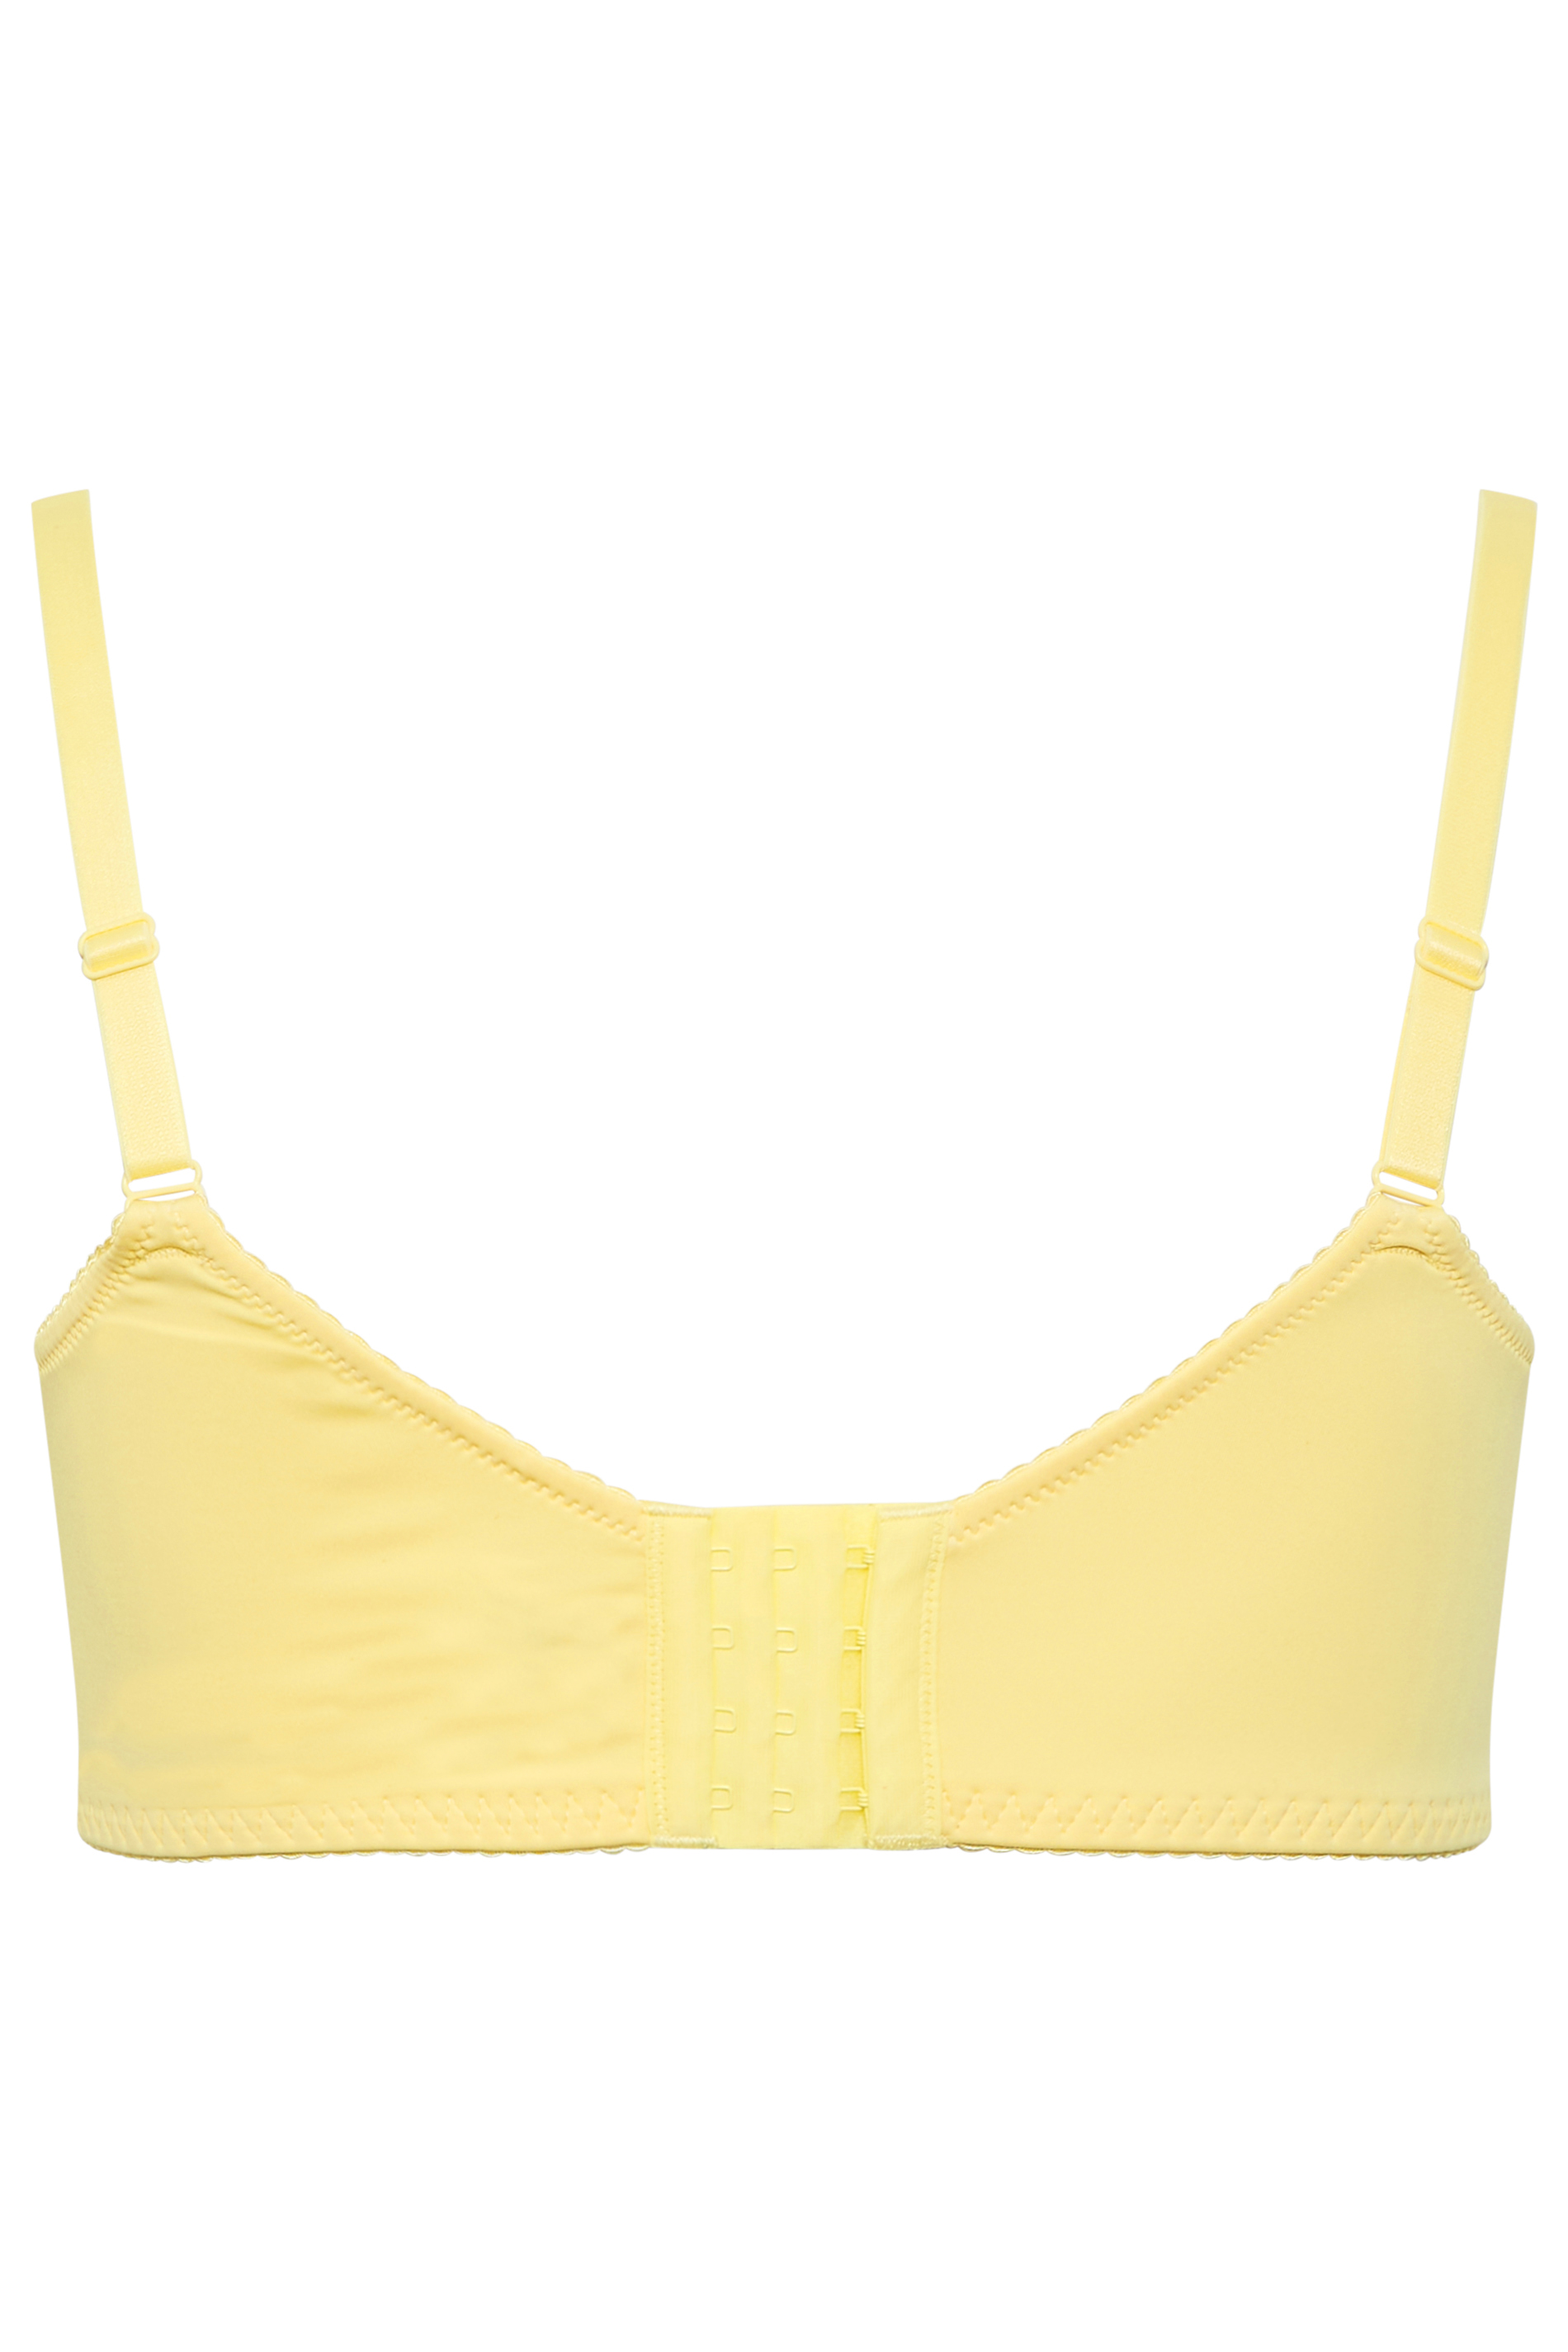 YOURS Plus Size Yellow Stretch Lace Non-Padded Underwired Balcony Bra